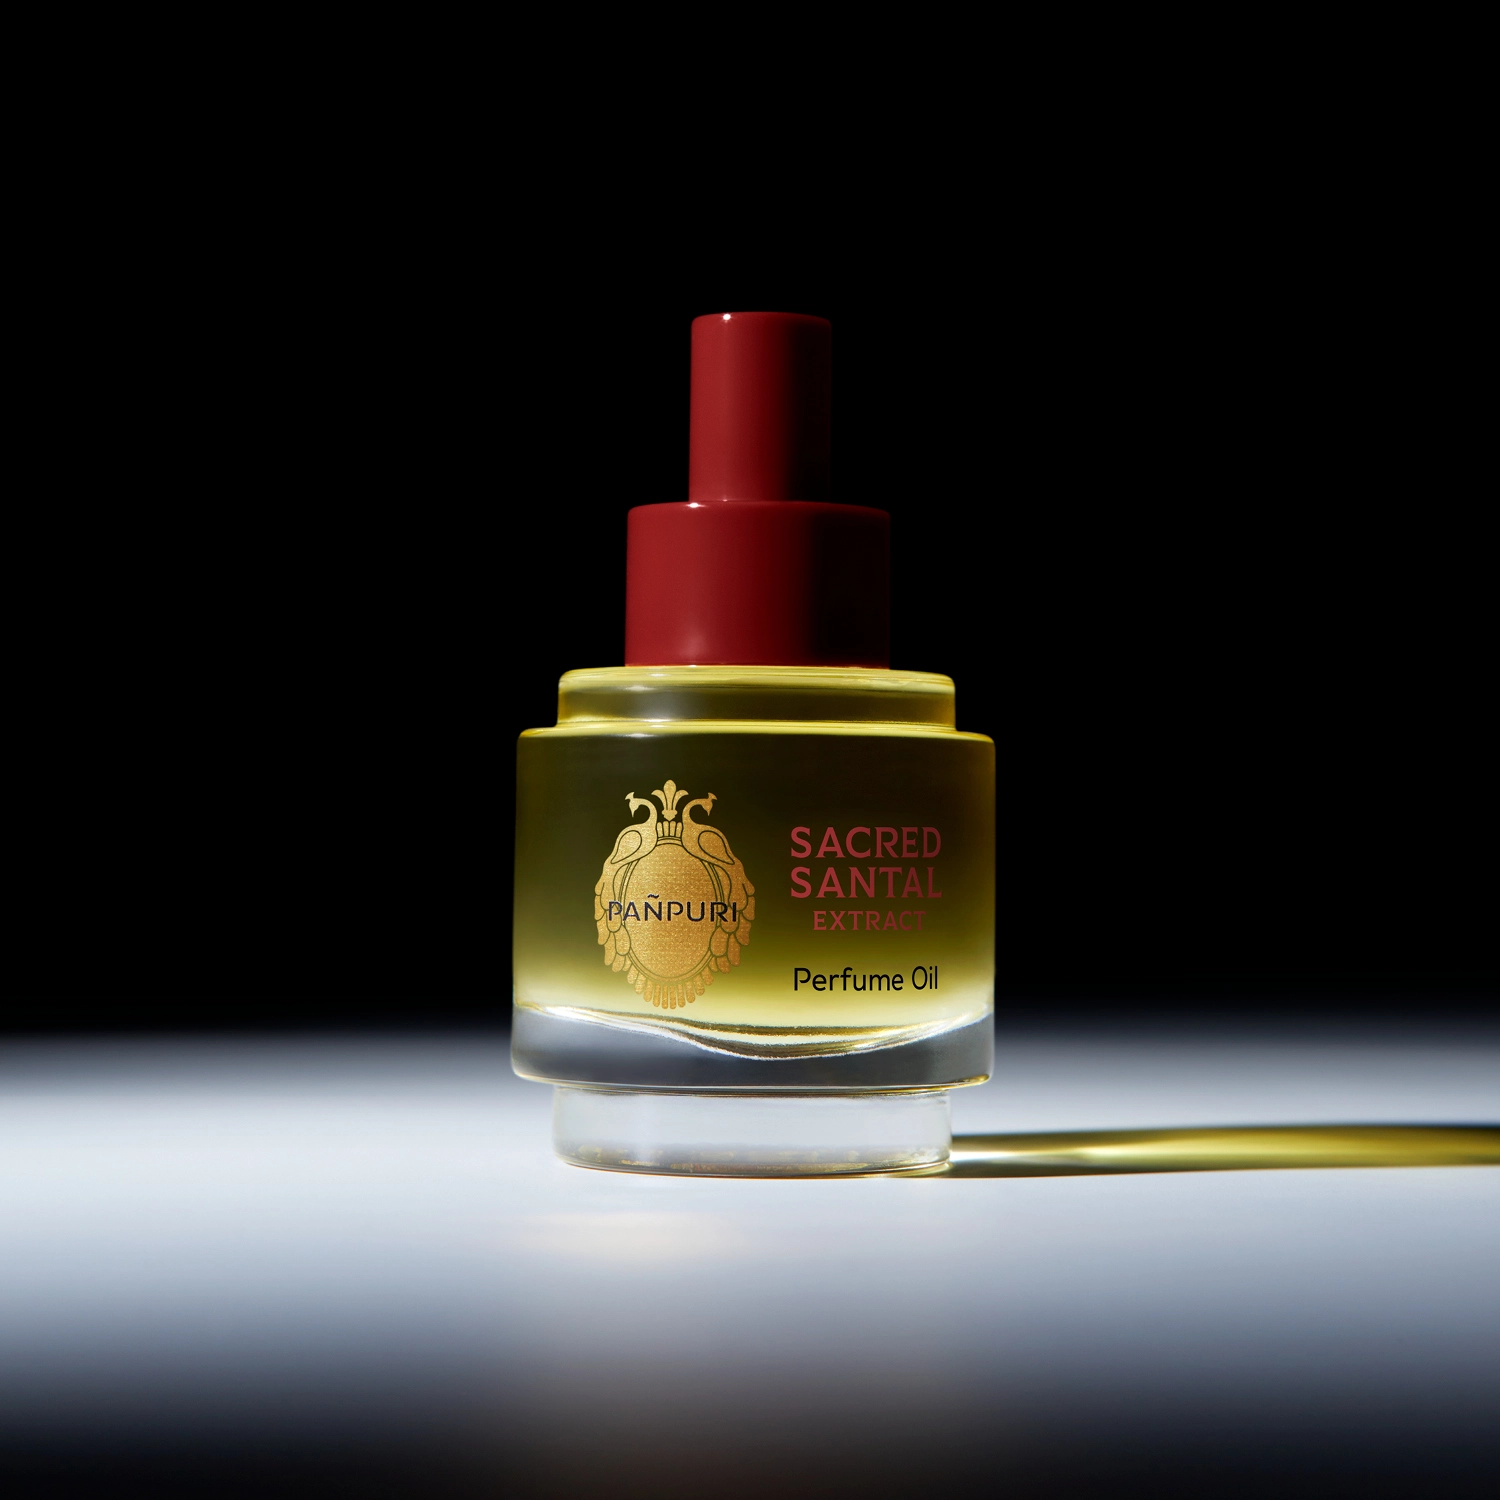 The story perfume oil